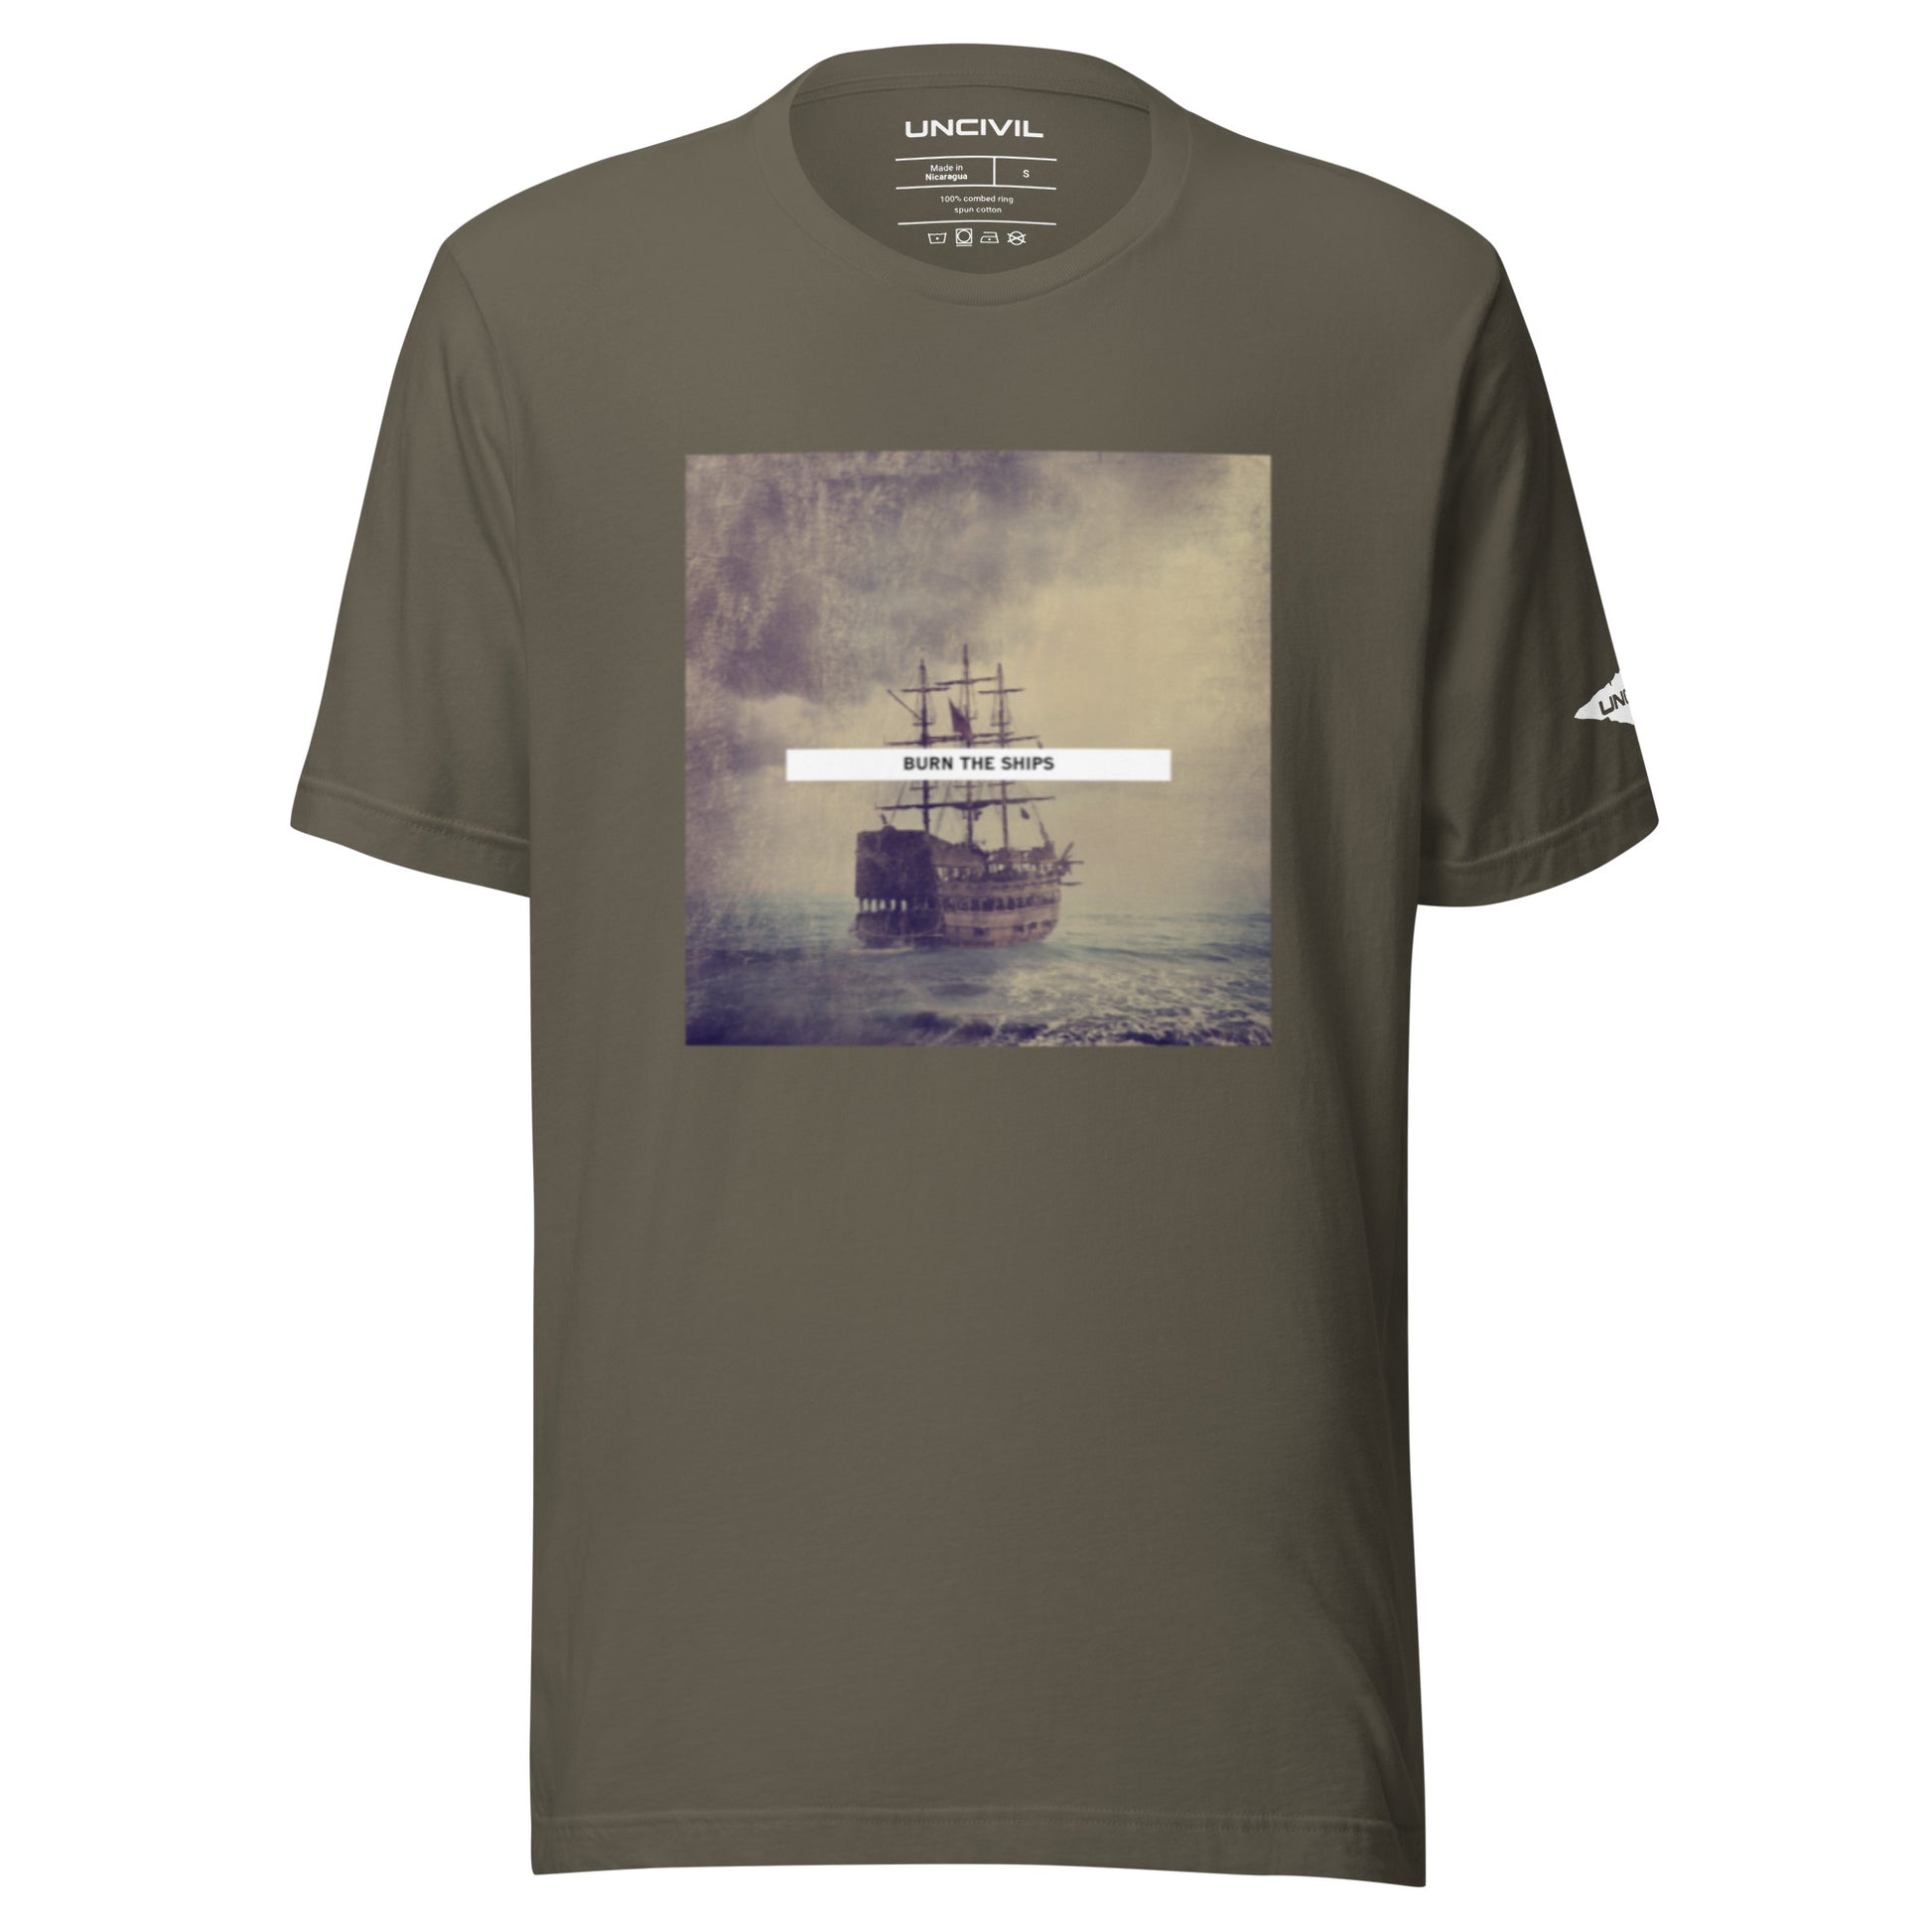 Burn the Ships shirt featuring a vintage image of a sailboat, army green for men and women. 